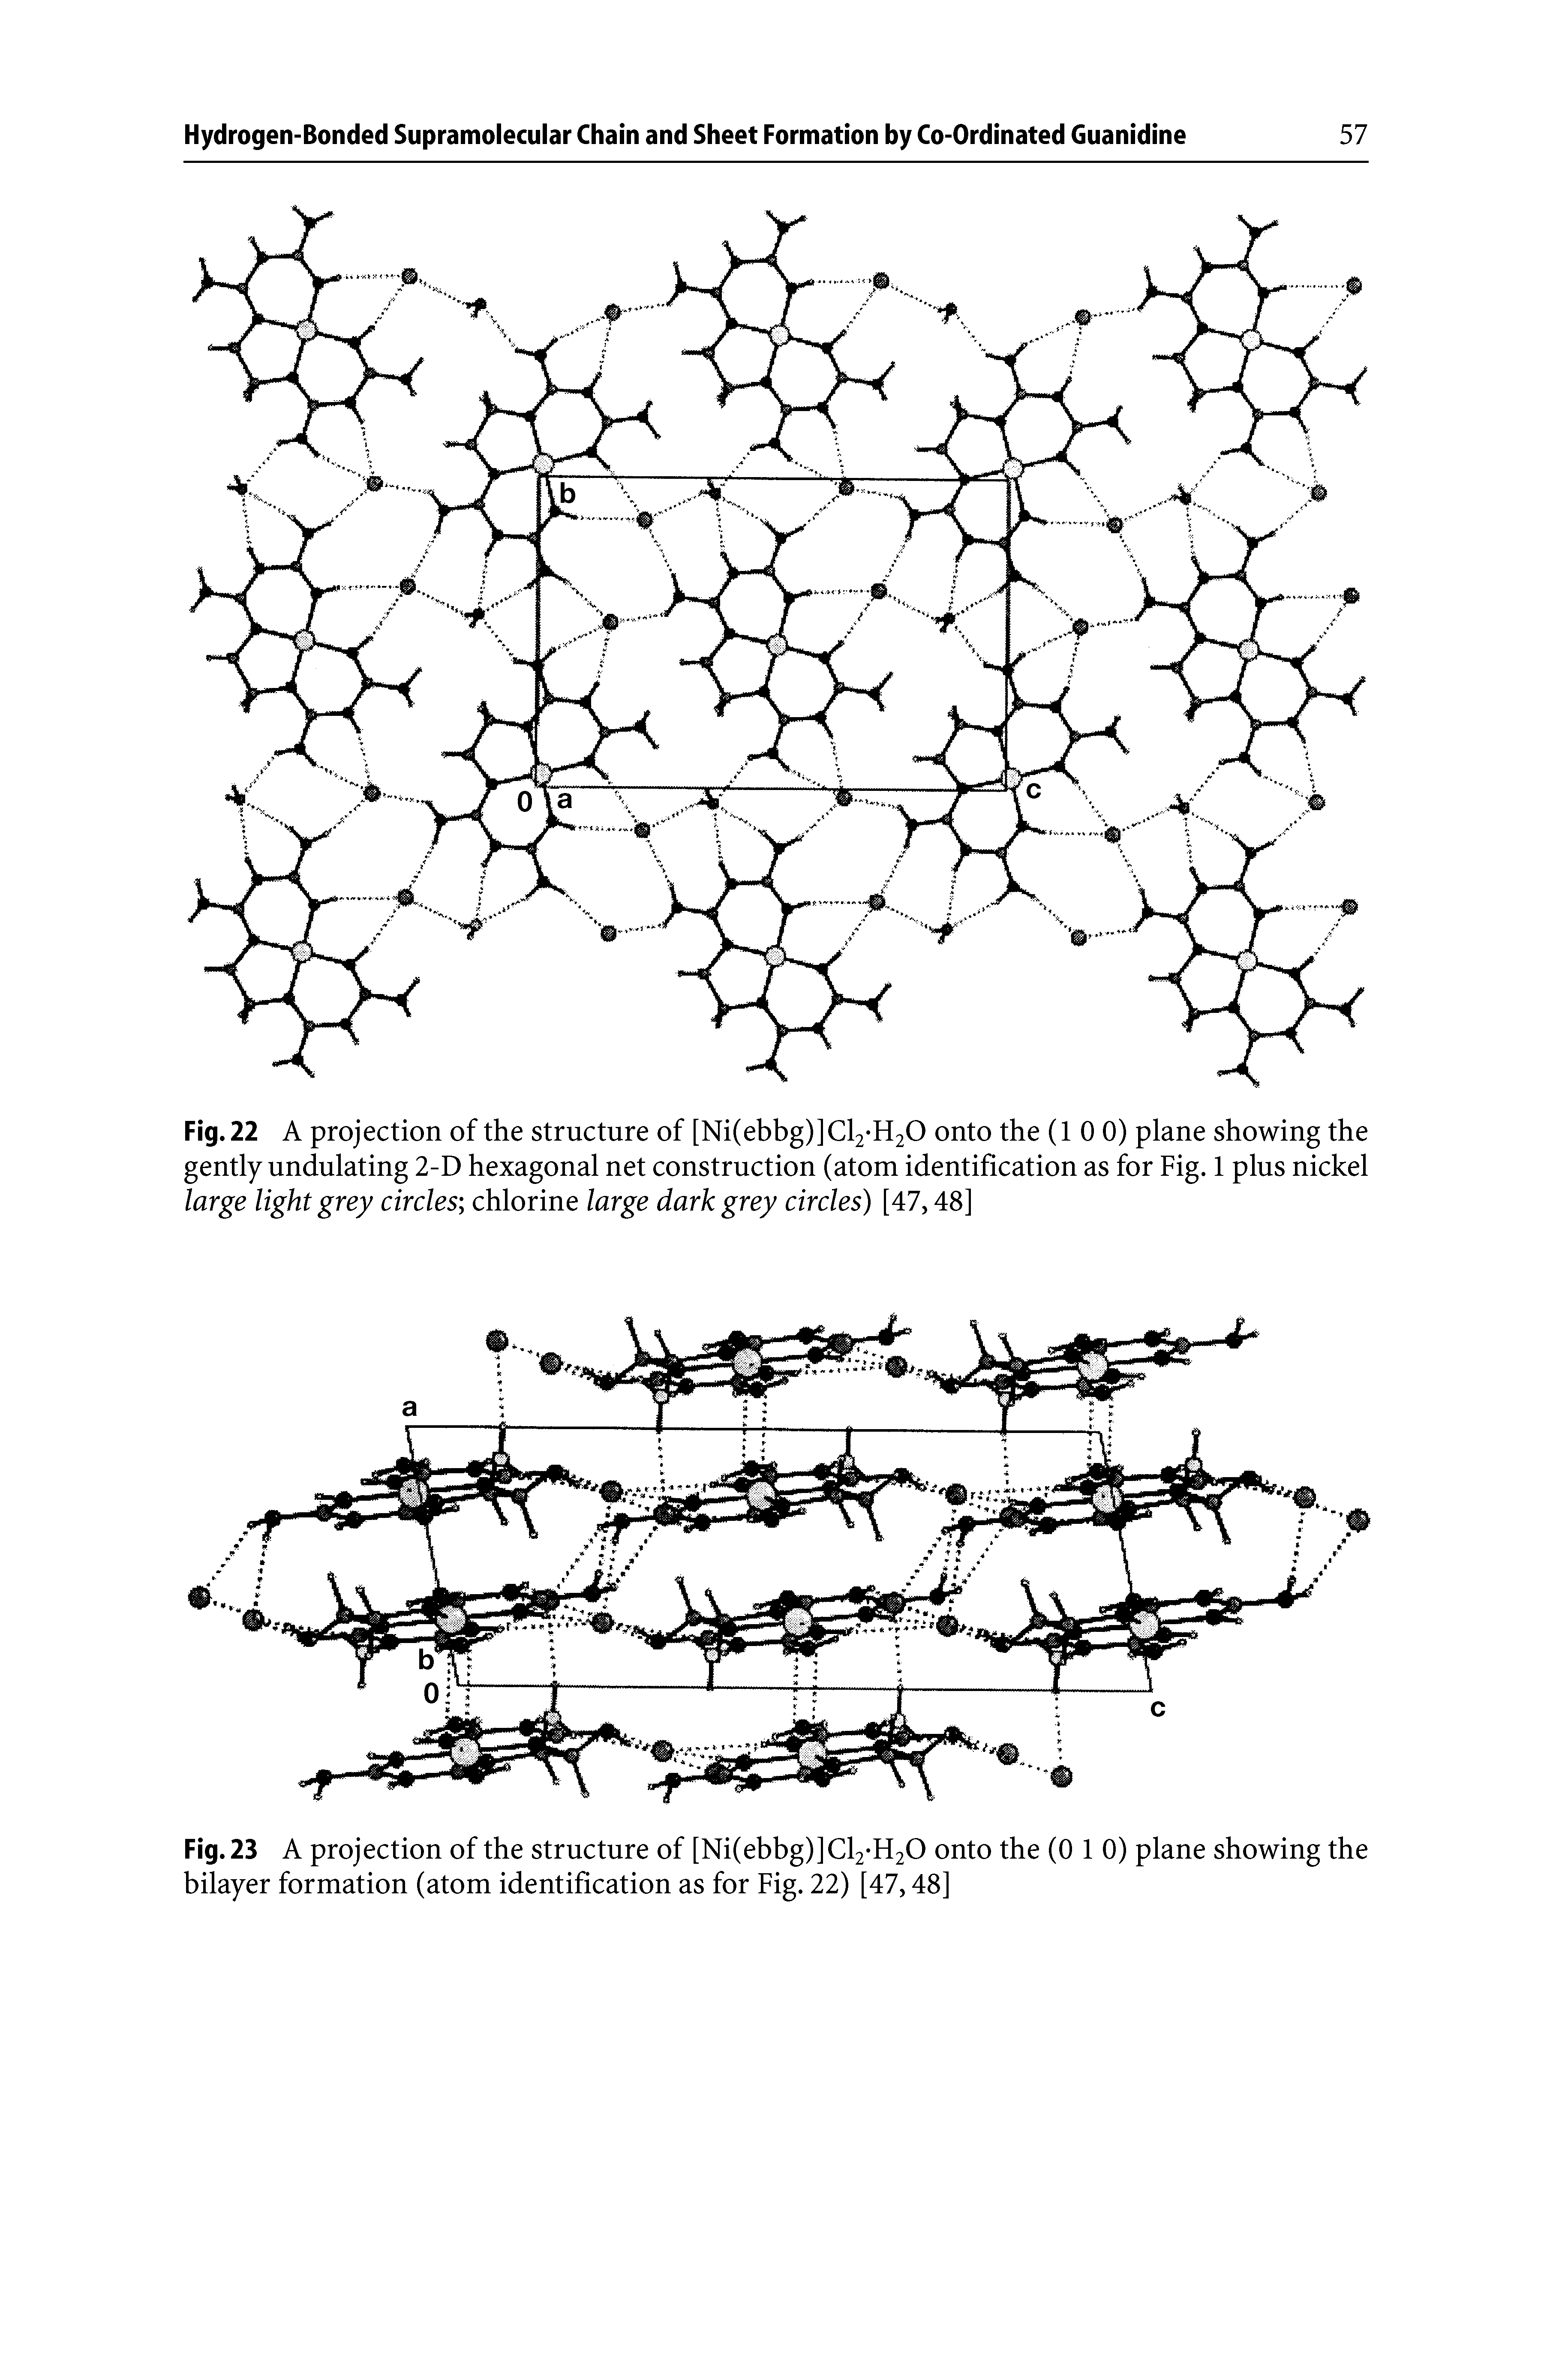 Fig. 23 A projection of the structure of [Ni(ebbg)]Cl2-H20 onto the (0 1 0) plane showing the bilayer formation (atom identification as for Fig. 22) [47,48]...